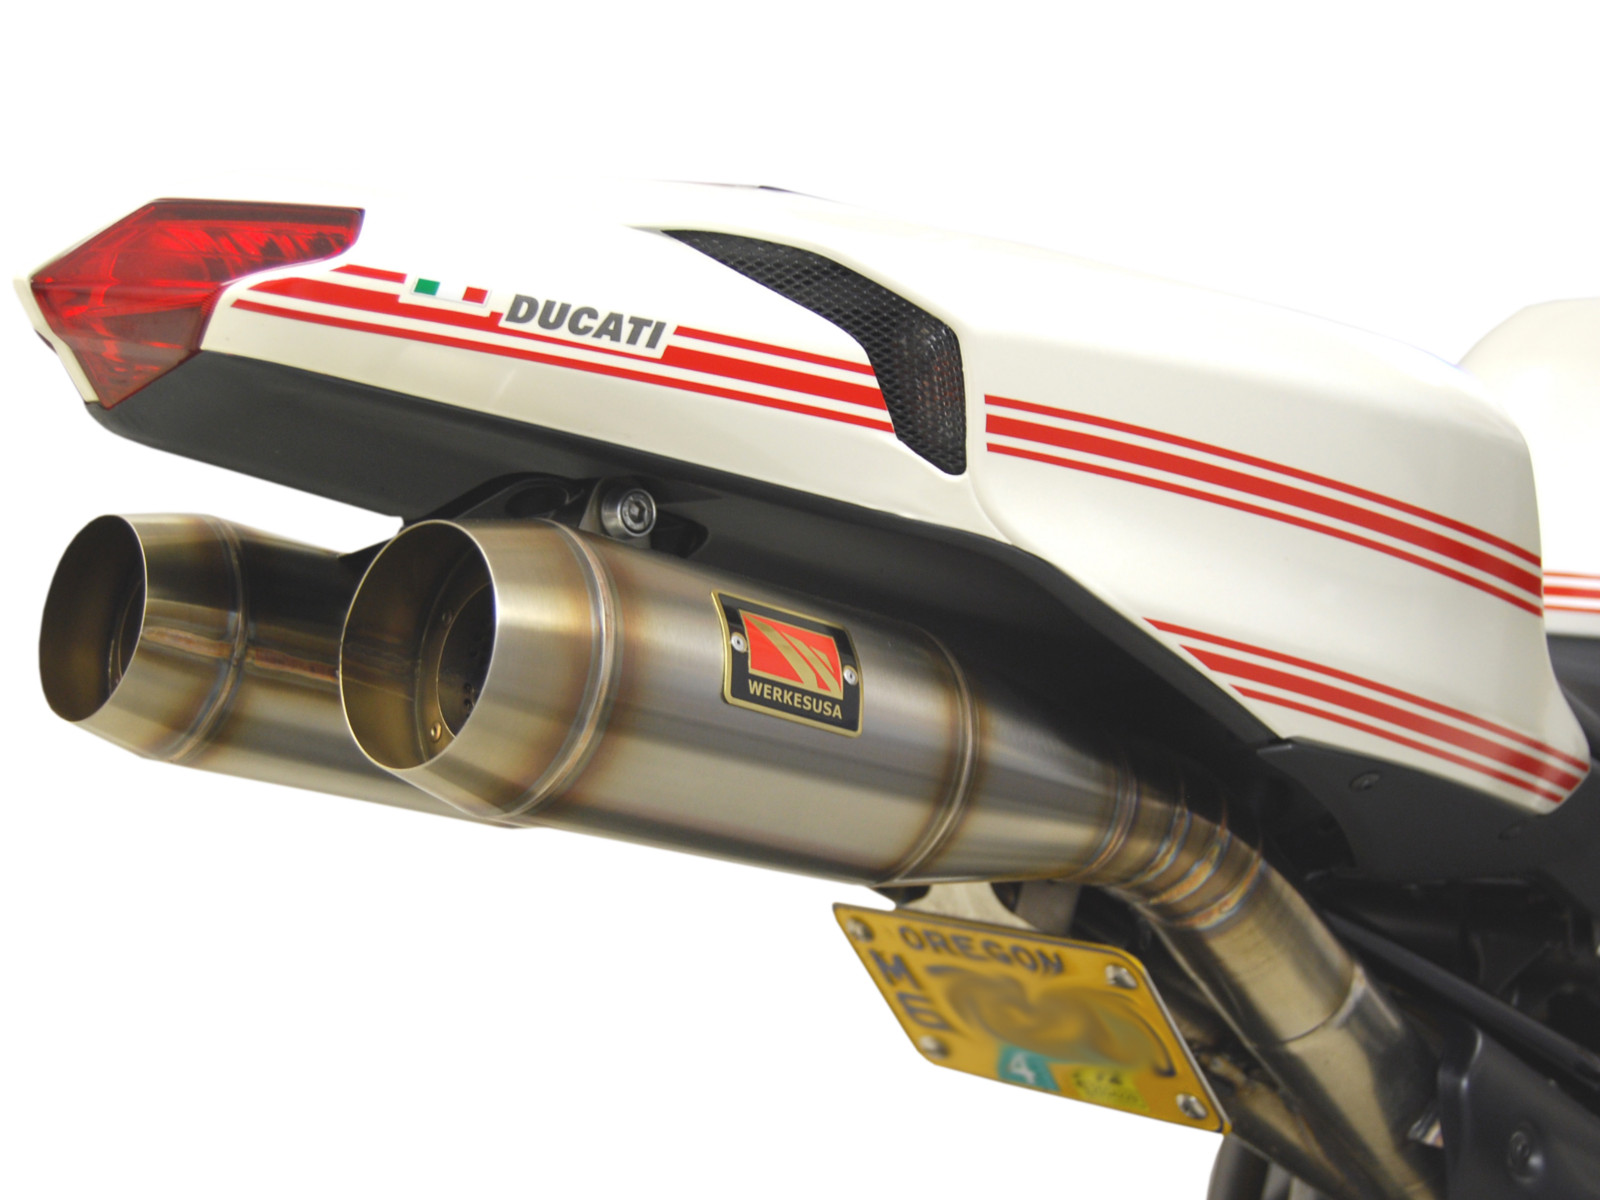 Dual GP Slip On Exhaust - for Ducati 848, 1098, 1198 - Click Image to Close